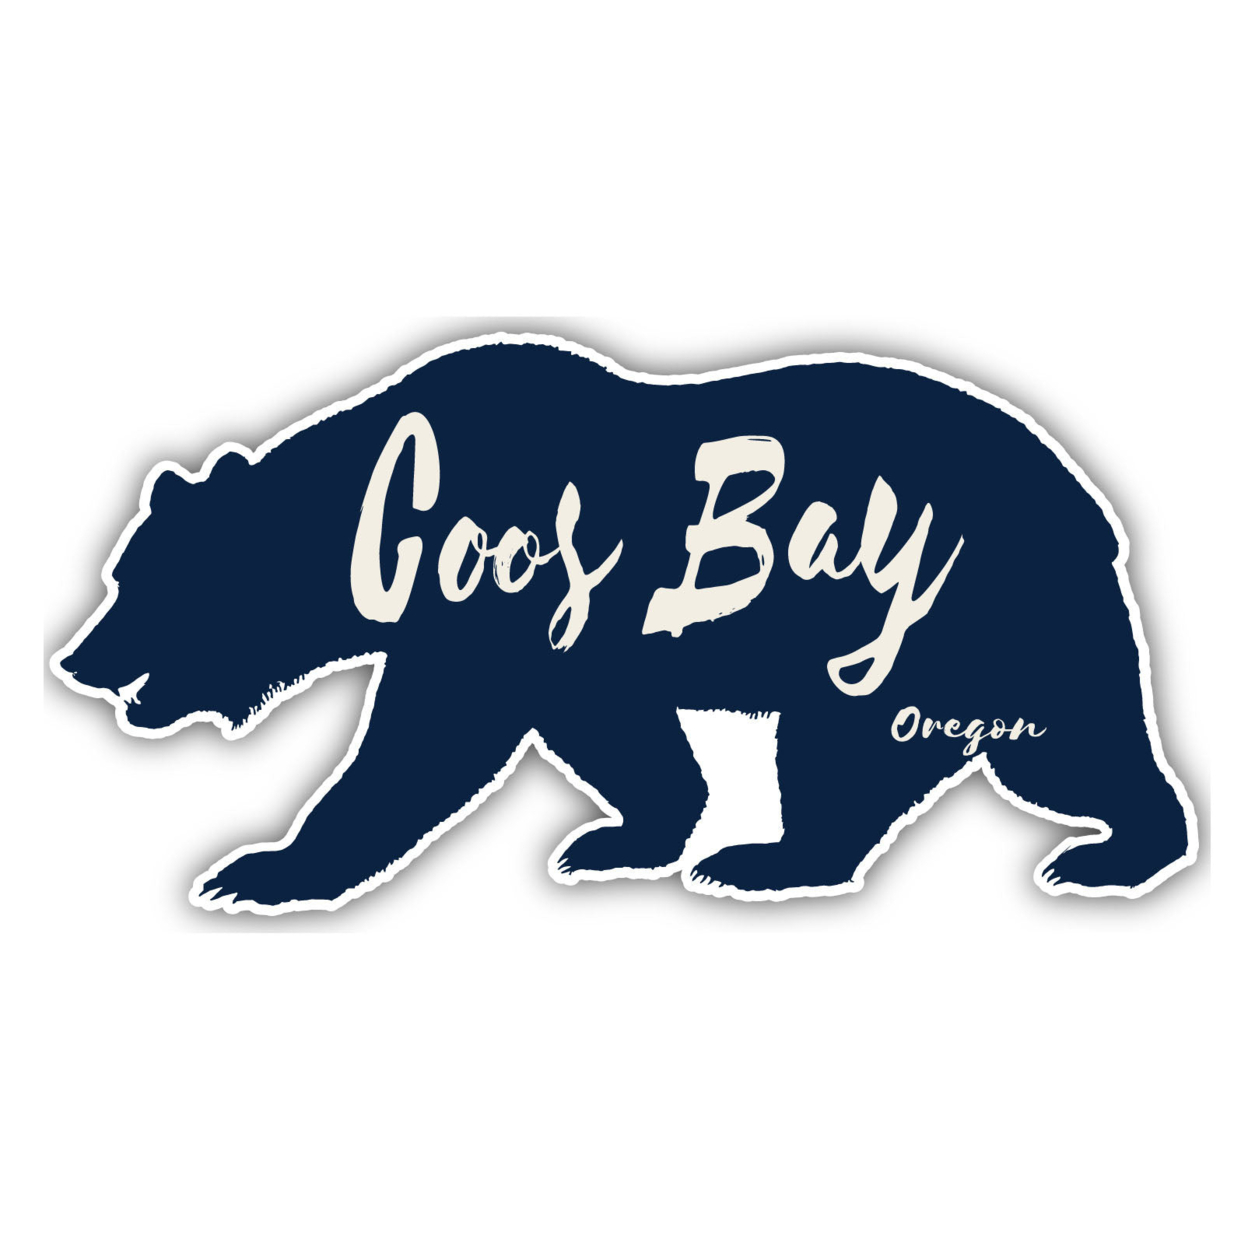 Coos Bay Oregon Souvenir Decorative Stickers (Choose Theme And Size) - 4-Pack, 10-Inch, Bear